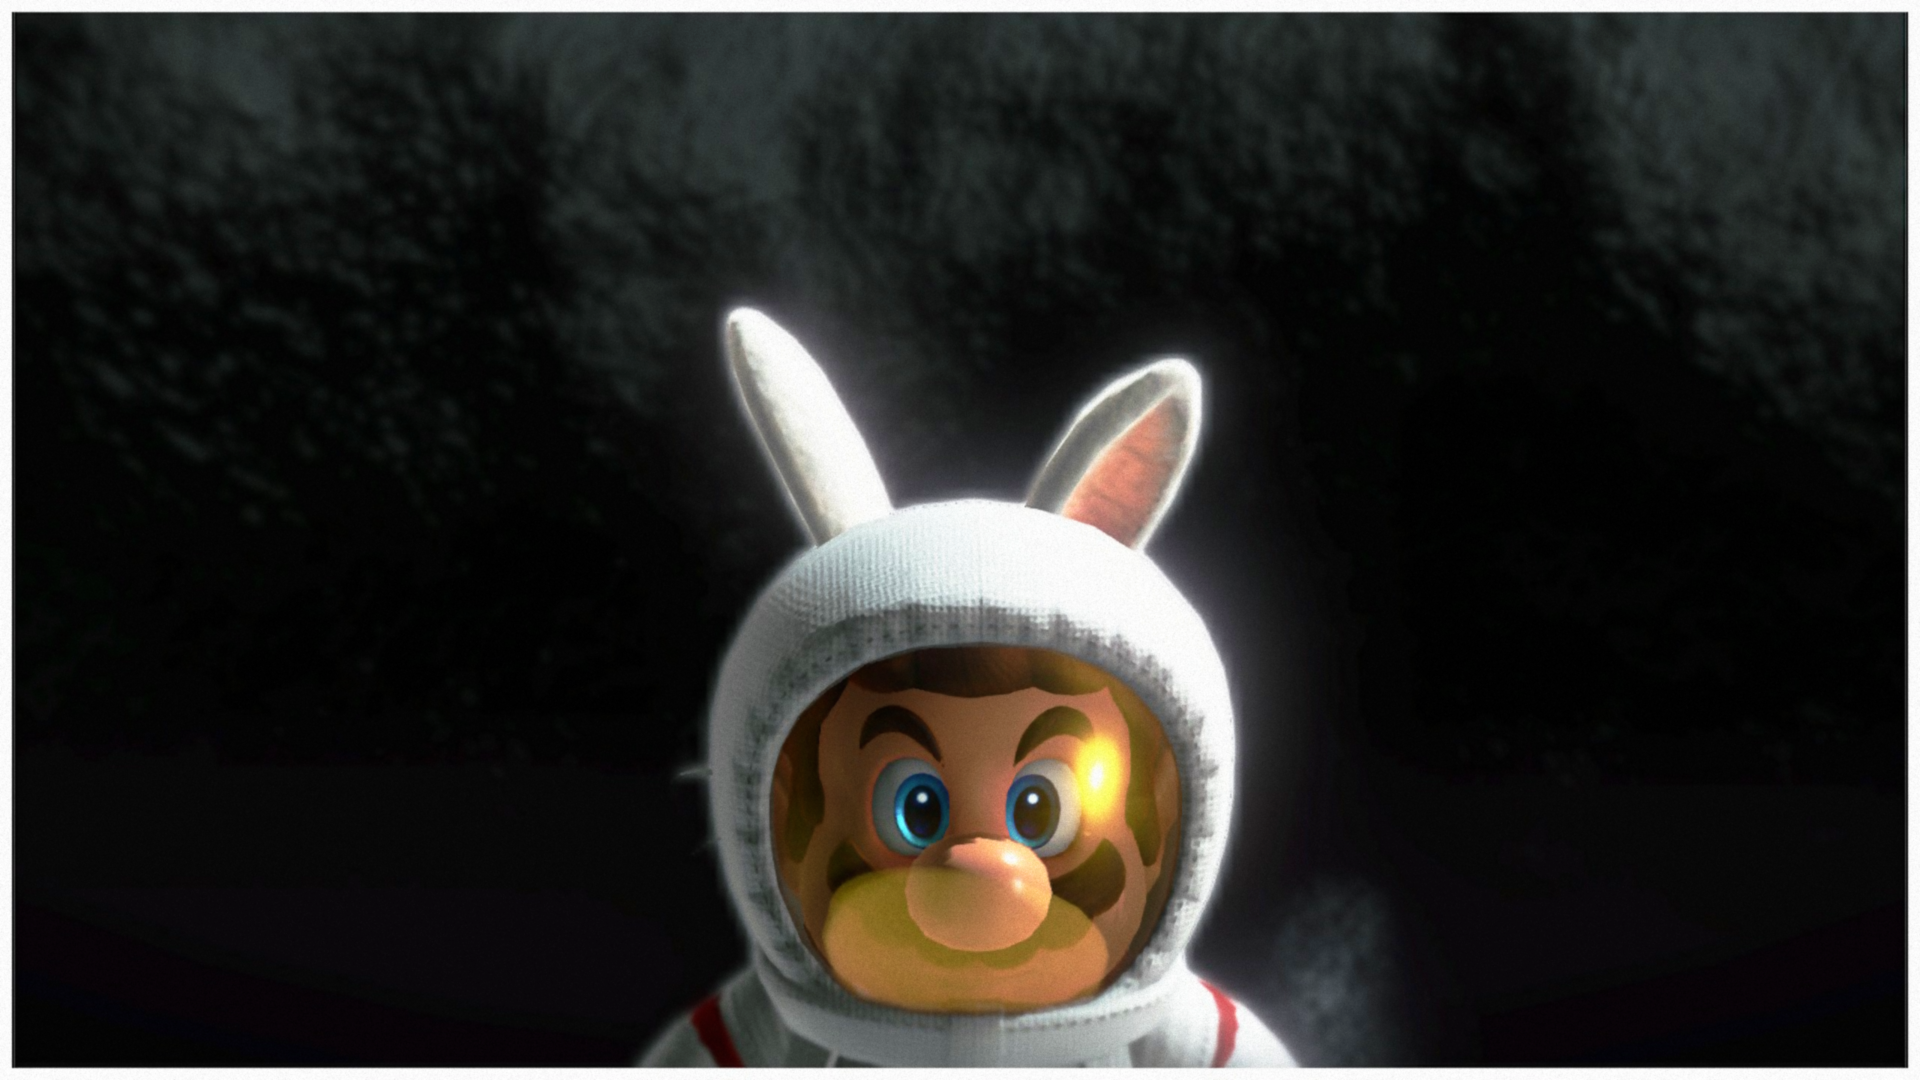 General 1920x1080 Super Mario Odyssey space bunny ears spacesuit humor Super Mario simple background video games video game characters